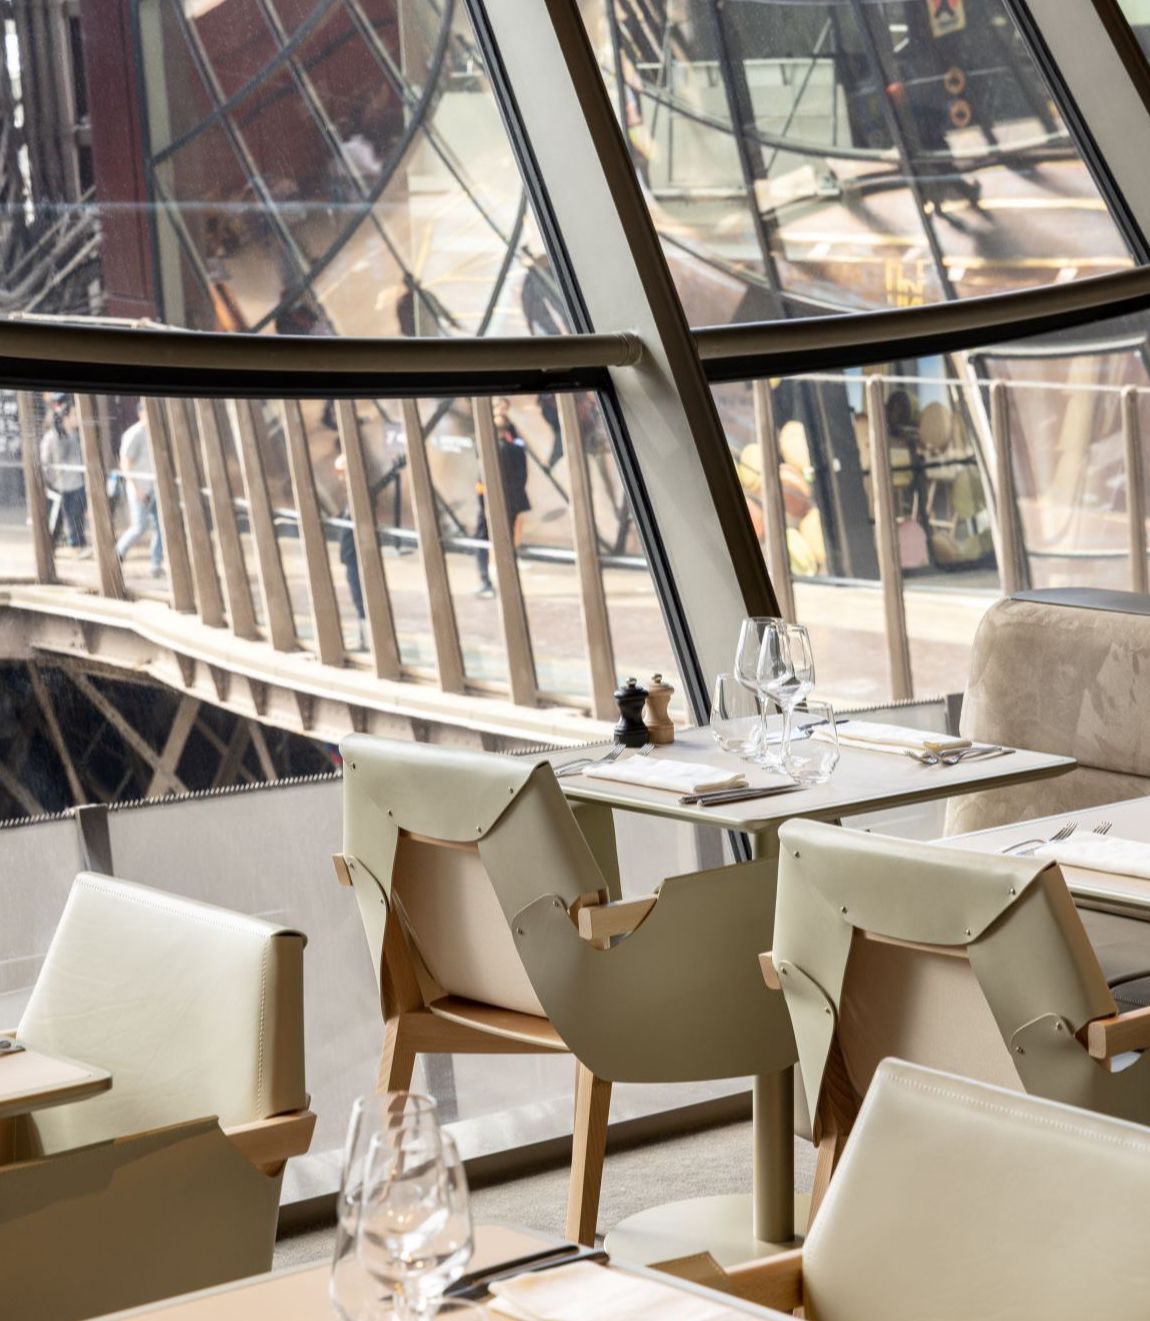 Lunch at the Eiffel tower restaurant "Madame Brasserie" ( Priority access)